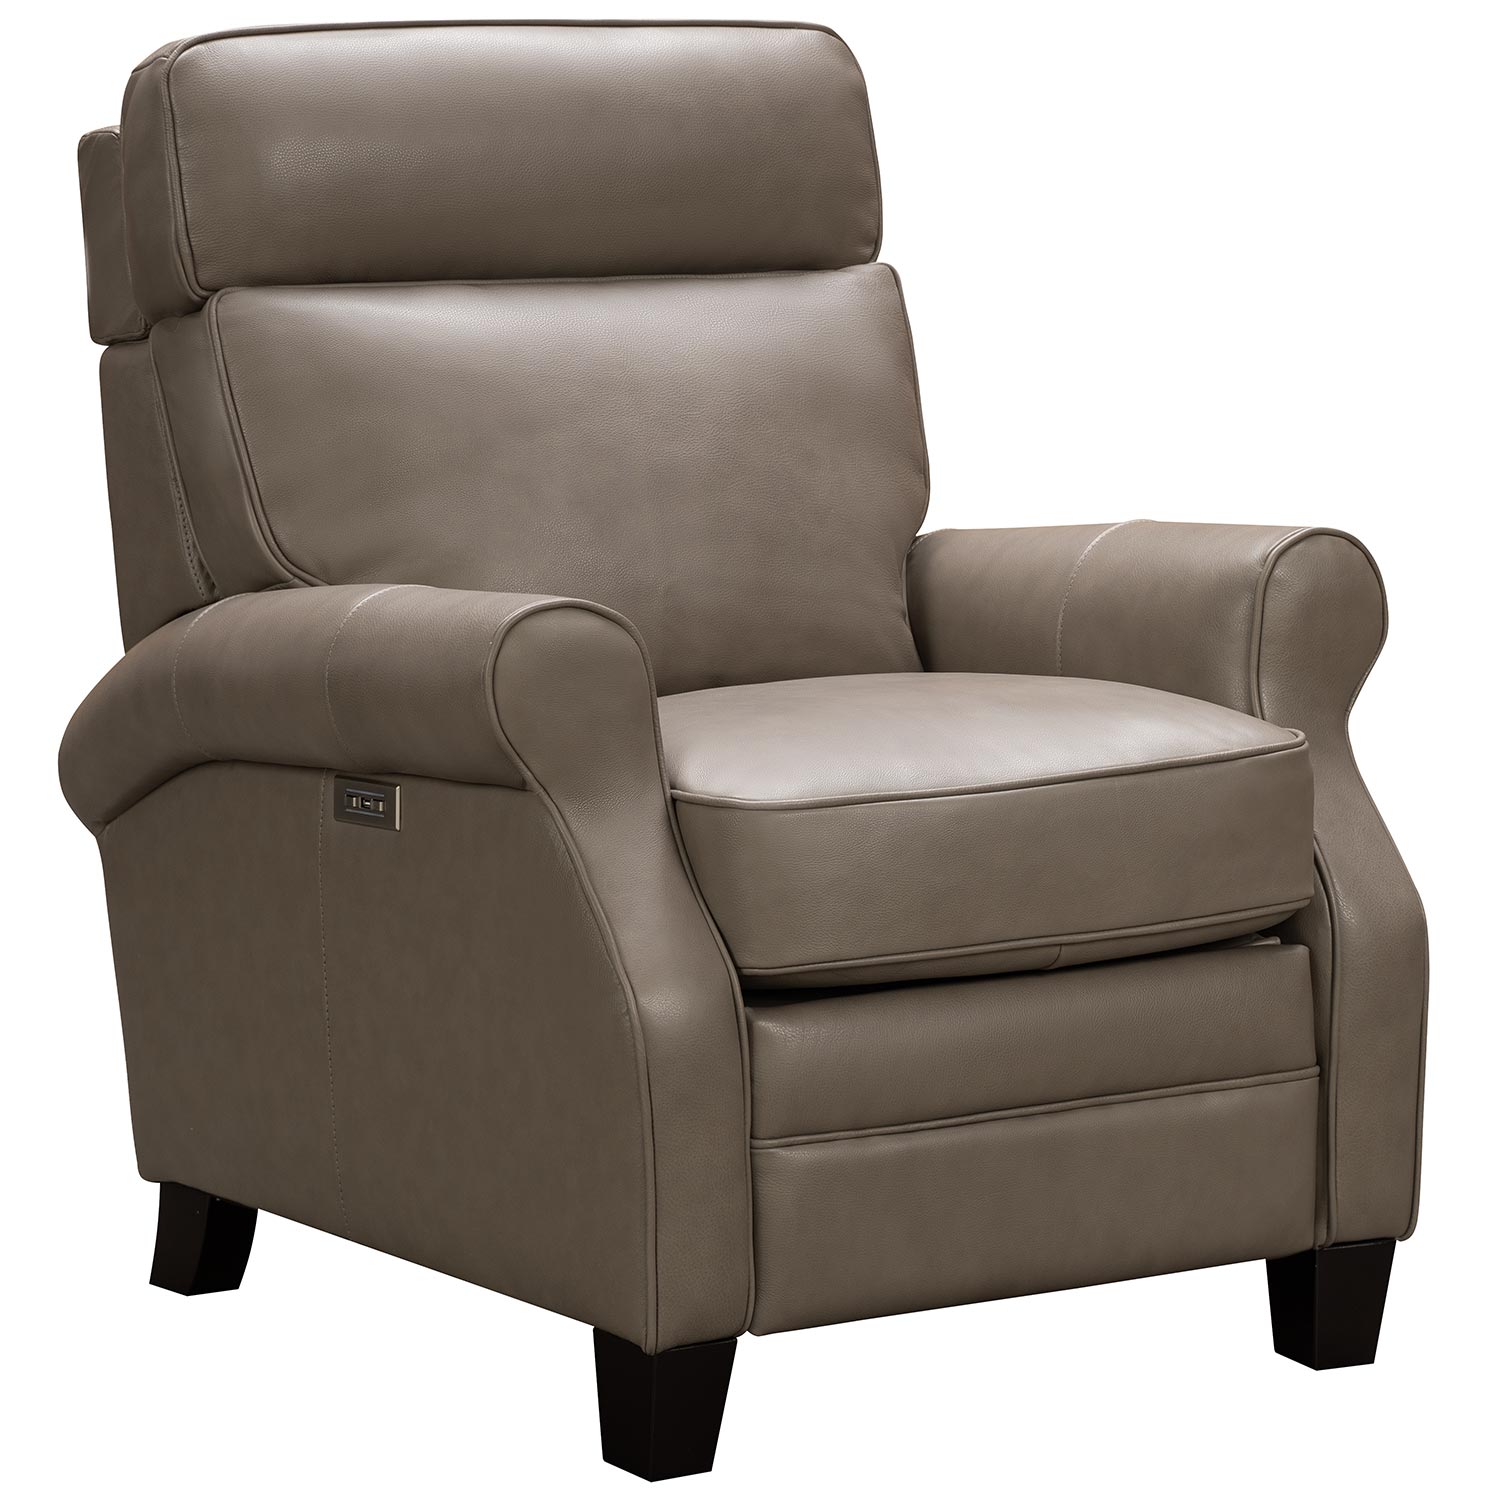 BarcaLounger 9PH-1178-3623-85 Remi Power Recliner w/ Heads Up Power Forward  Head Rest in Paris Gray Top Grain Leather